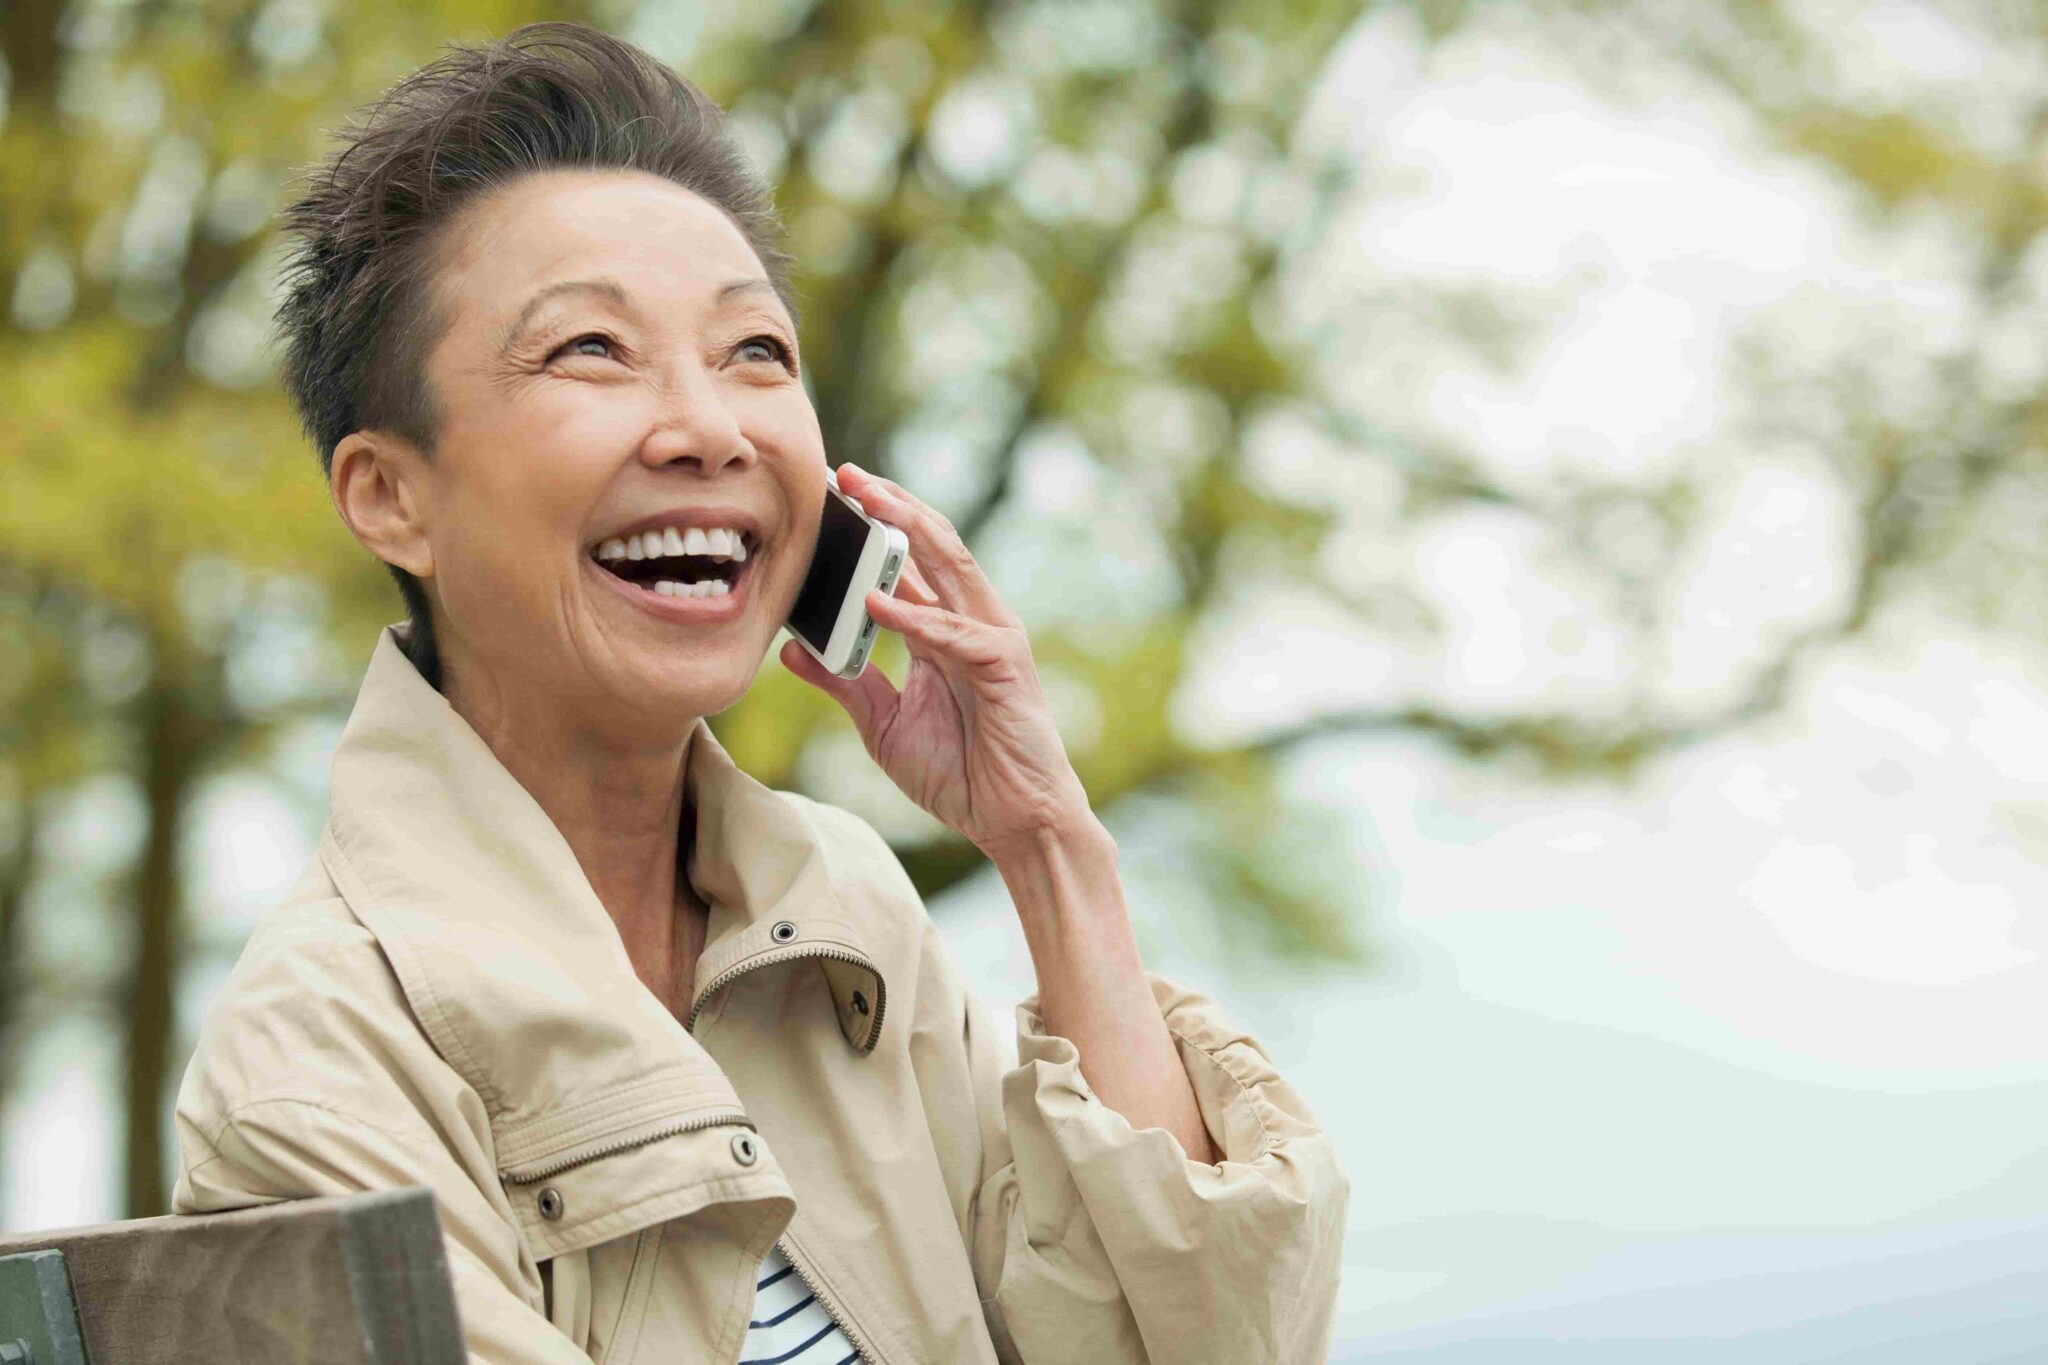 Middle-aged woman sitting outside while speaking on her cellphone